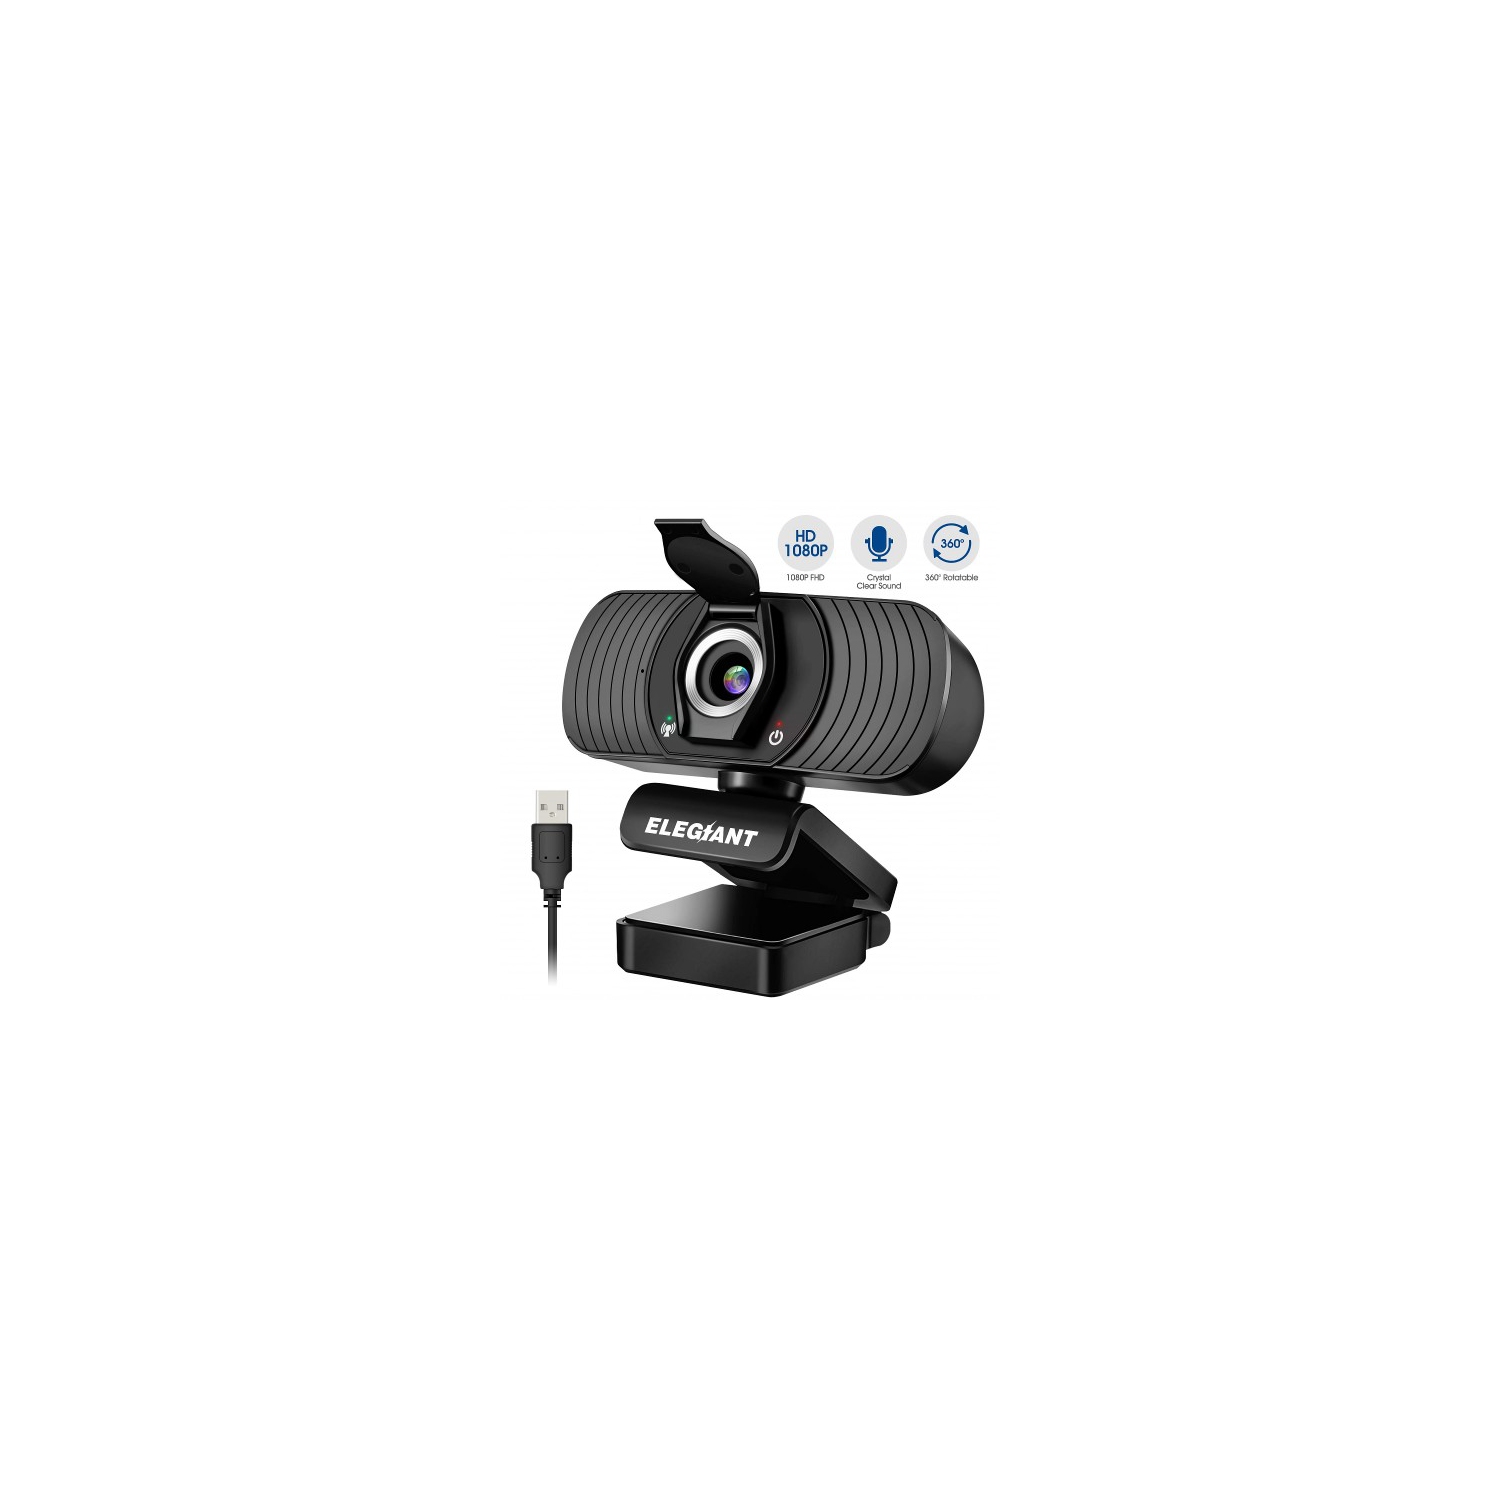 1080P Webcam with Microphone, Full HD Camera with Privacy Cover for PC Laptop, Desktop, Plug and Play for Conference Call, Skype, Zoom